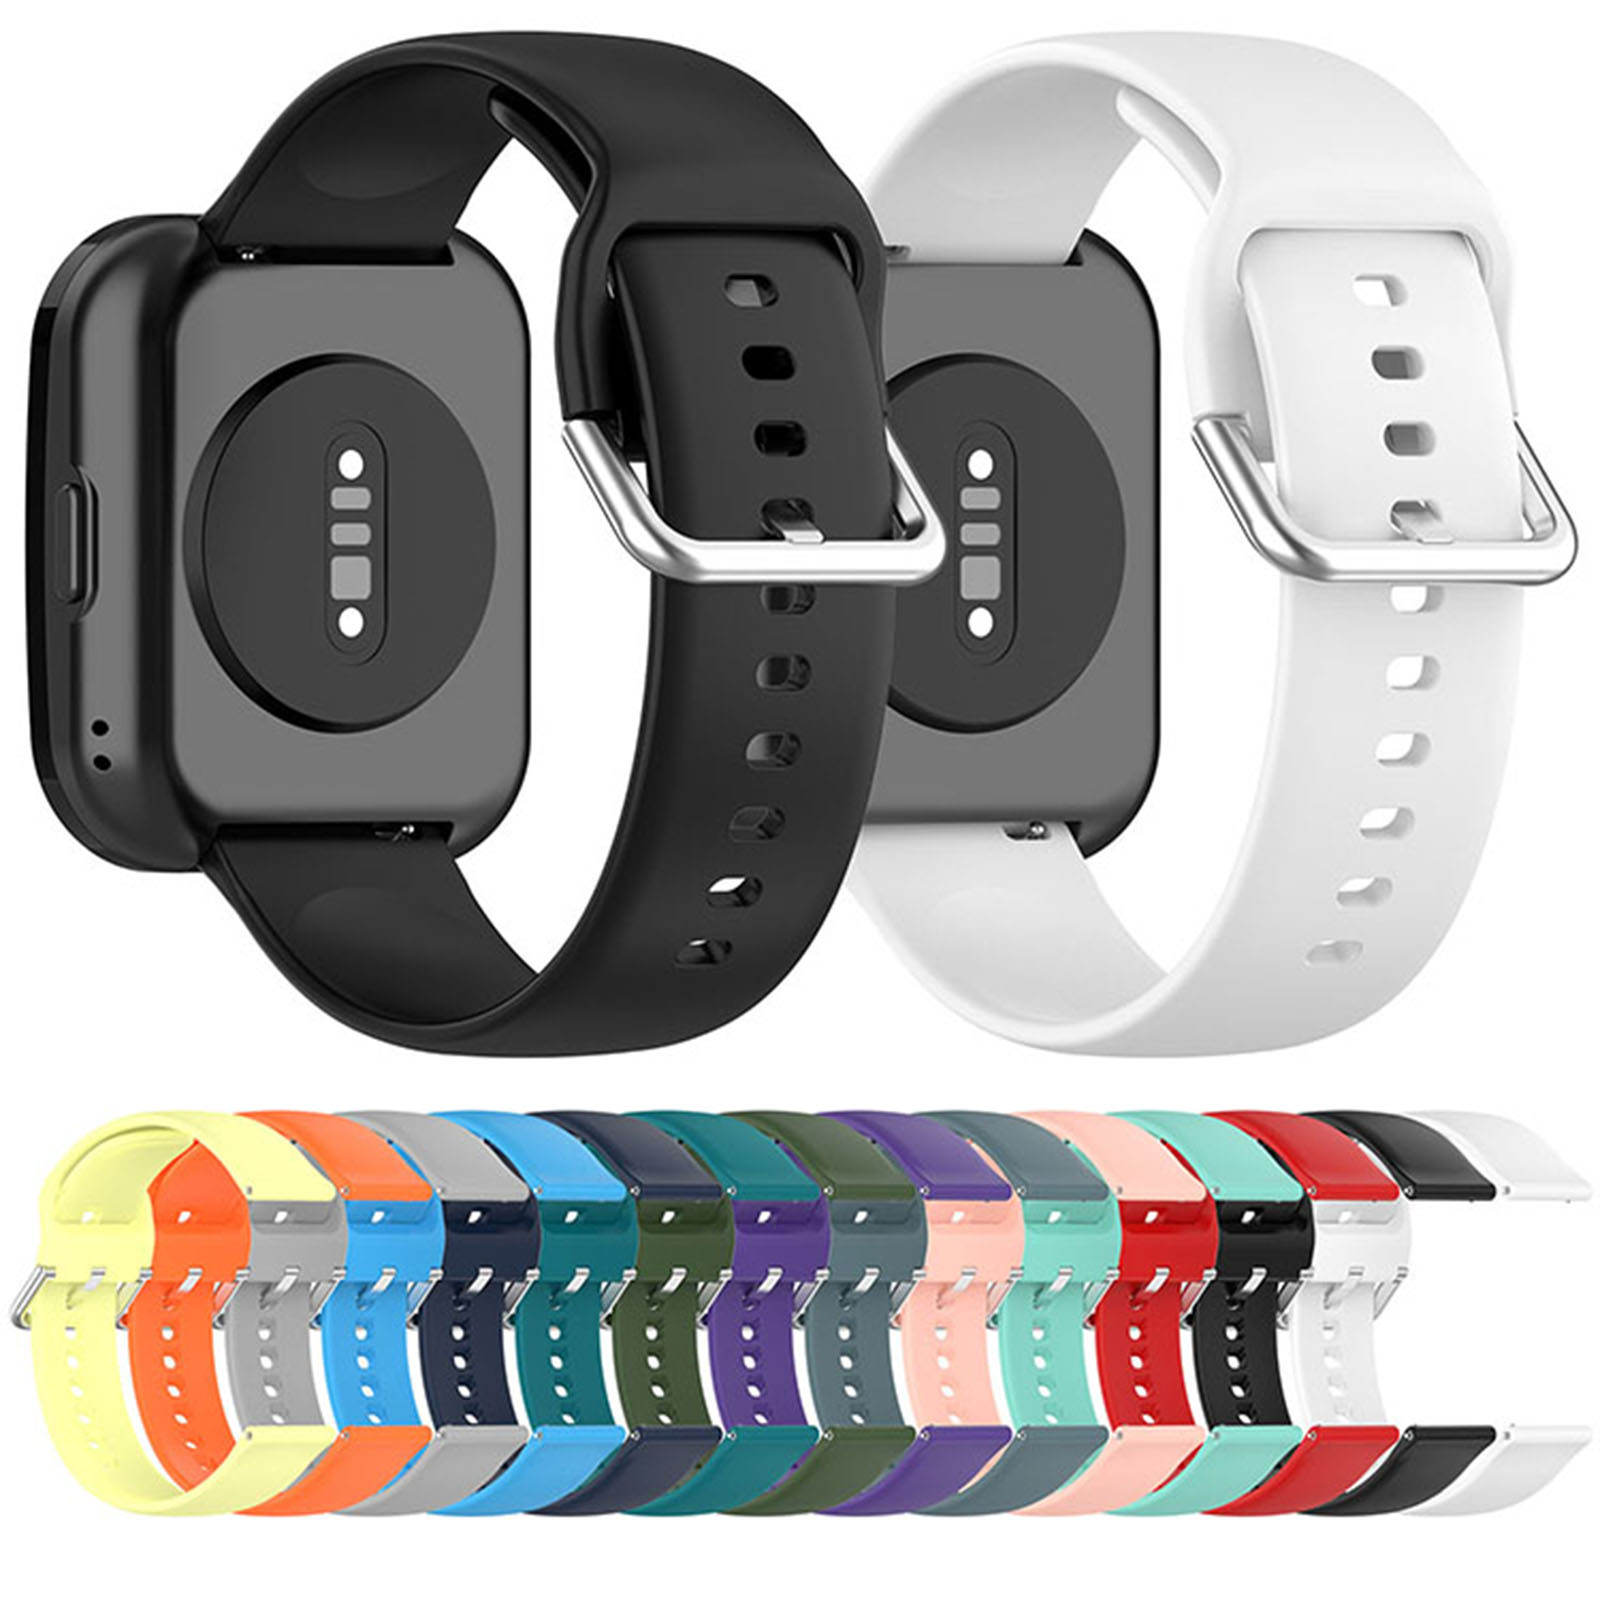 Sport strap For Amazfit GTR 3 Pro/4 Limited Edition/2/2e/47mm Watchband  Silicone Bracelet